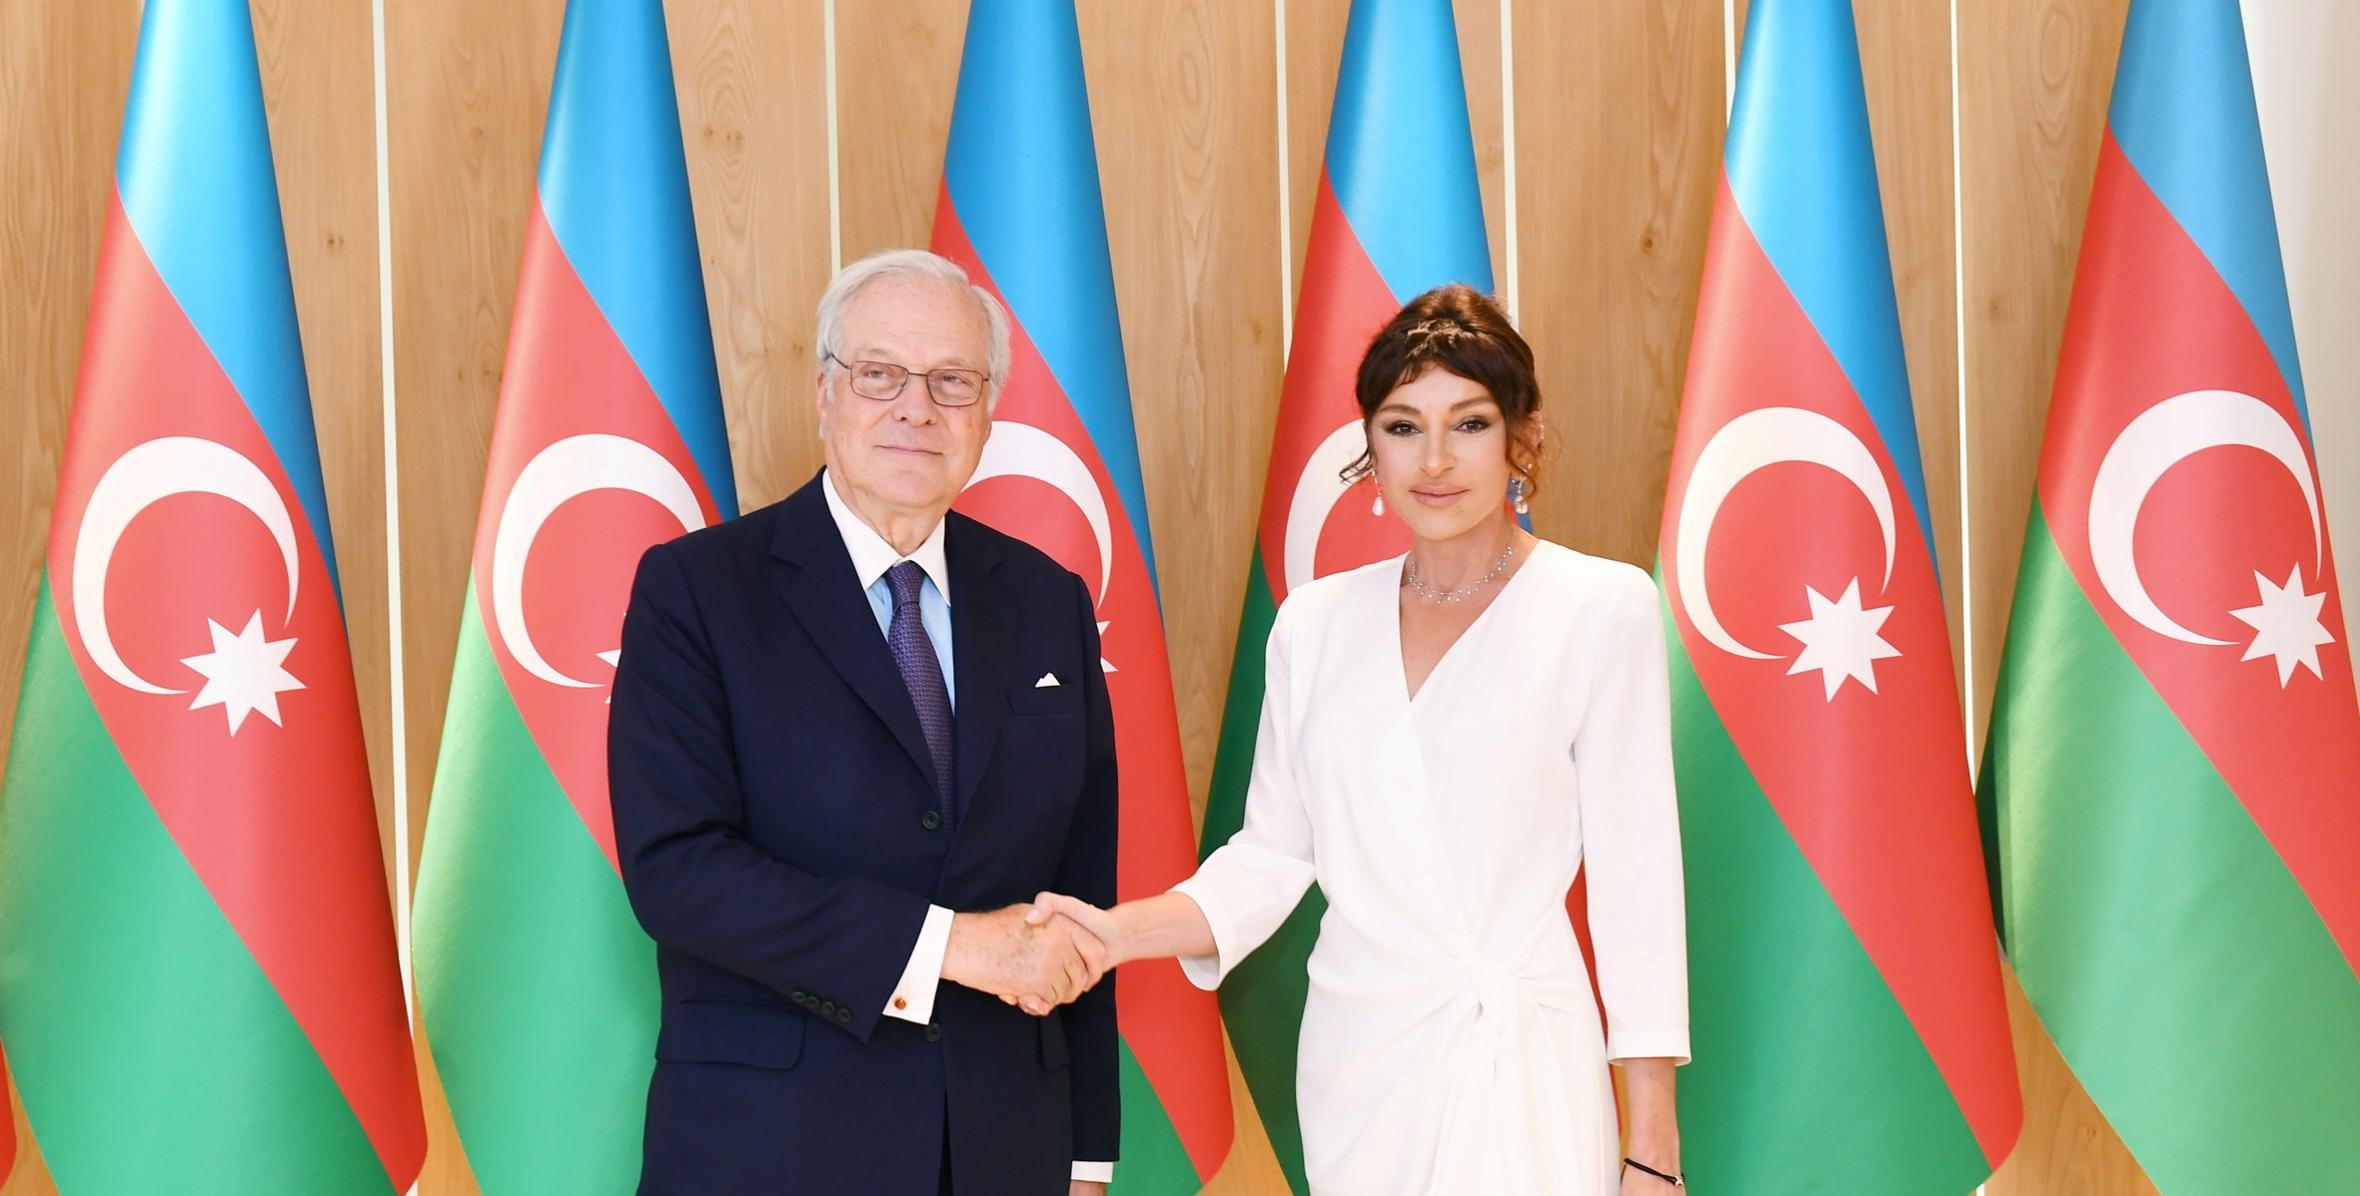 First Vice-President Mehriban Aliyeva met with chairman of Rothschild Global Financial Advisory